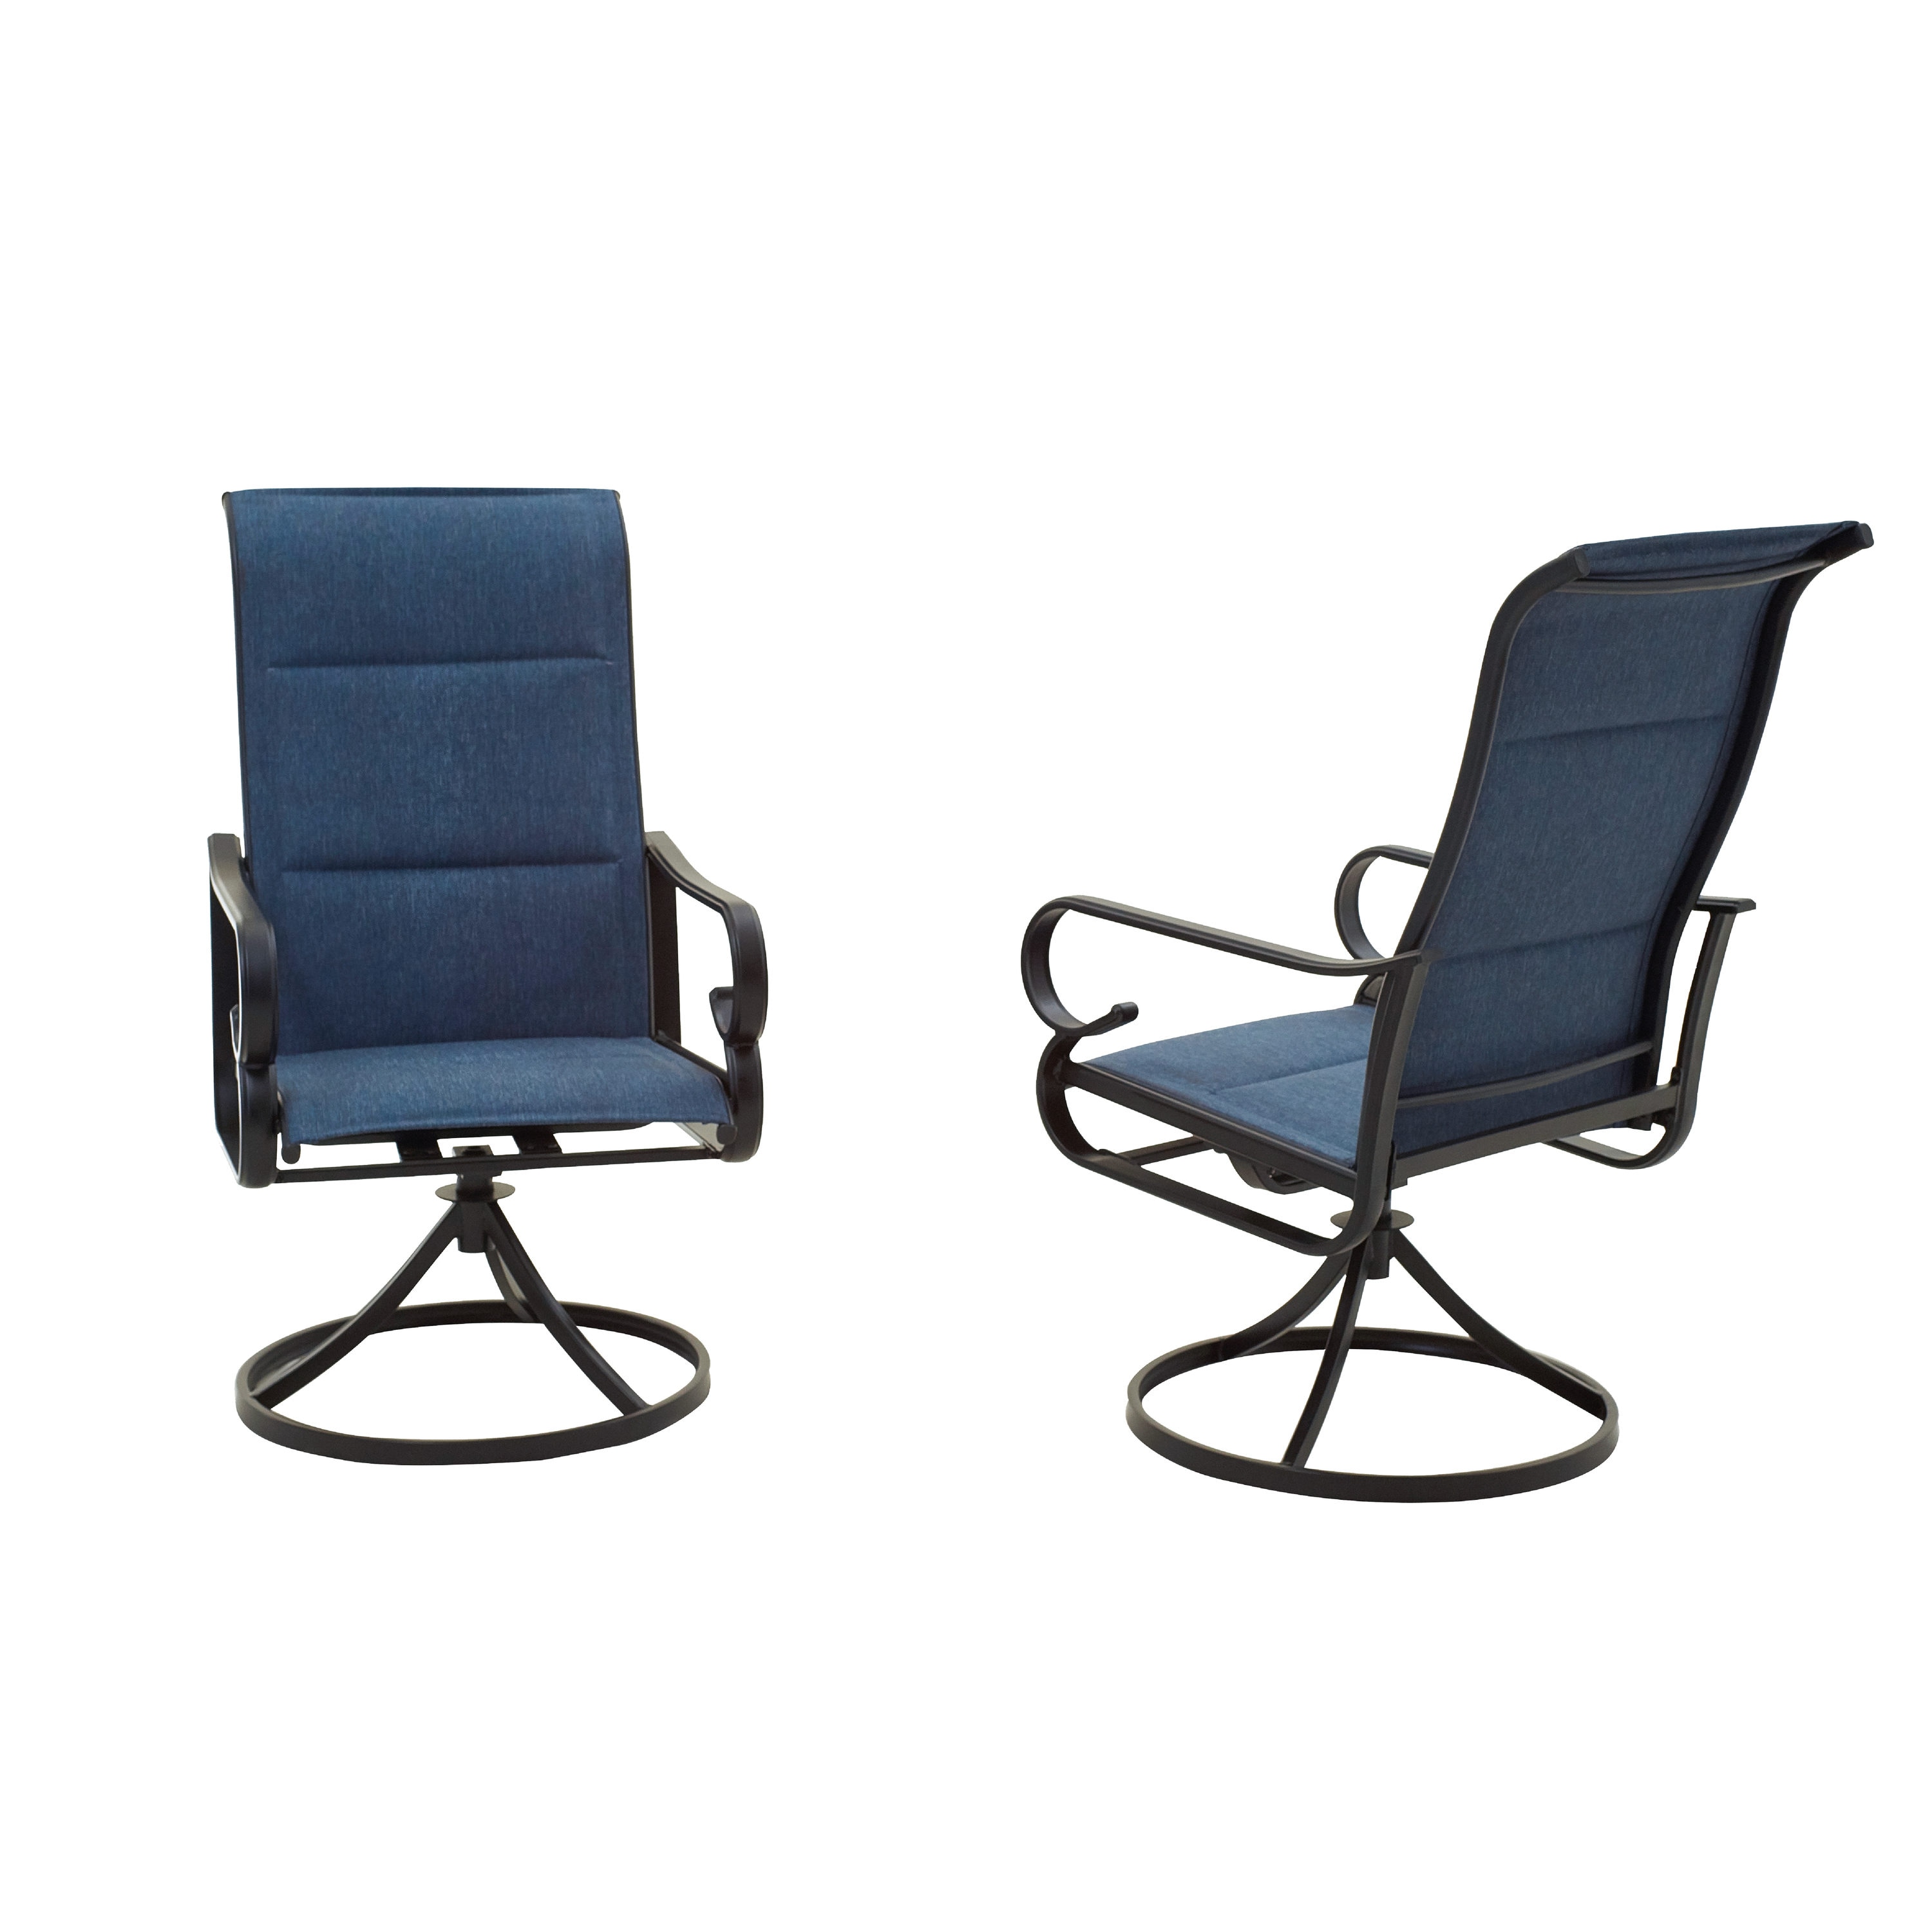 Swivel Rocker Outdoor Dining Chairs | lupon.gov.ph